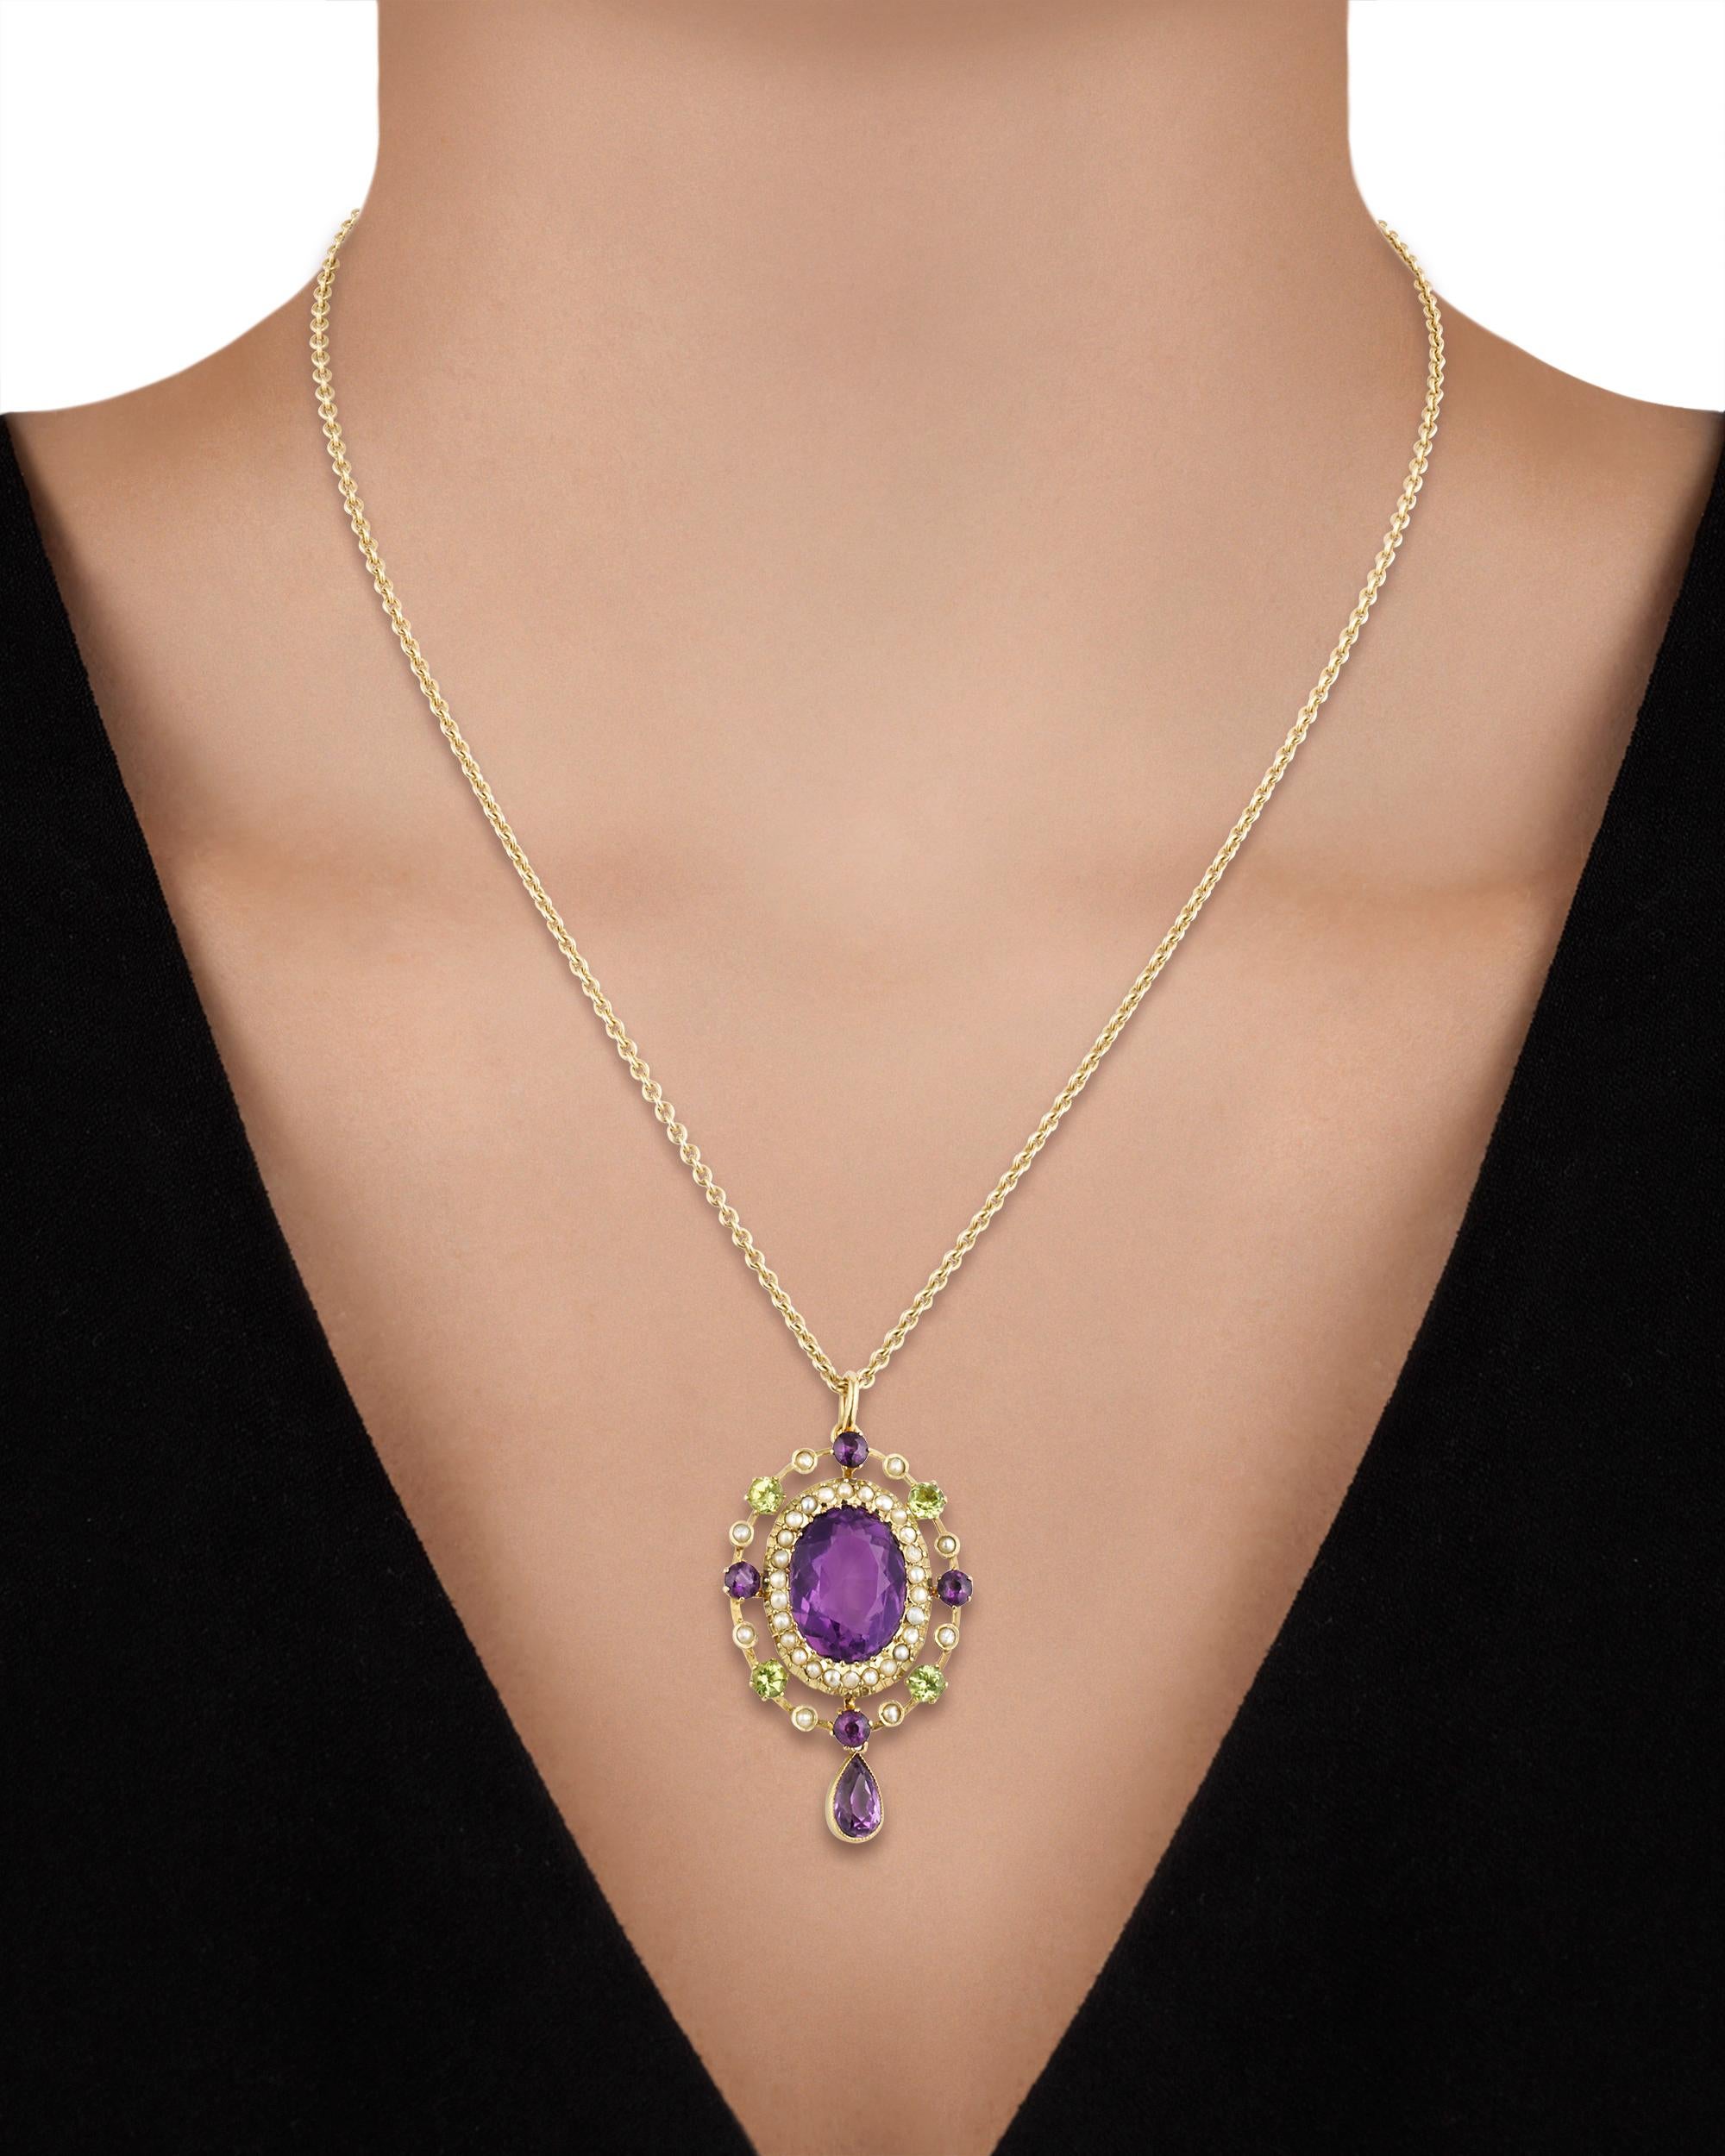 A dazzling piece of history, this rare Edwardian pendant is a stunning example of suffragette jewelry. The peridot, amethyst and seed pearls that are set in the intricate piece represent the official colors of the Women's Social and Political Union